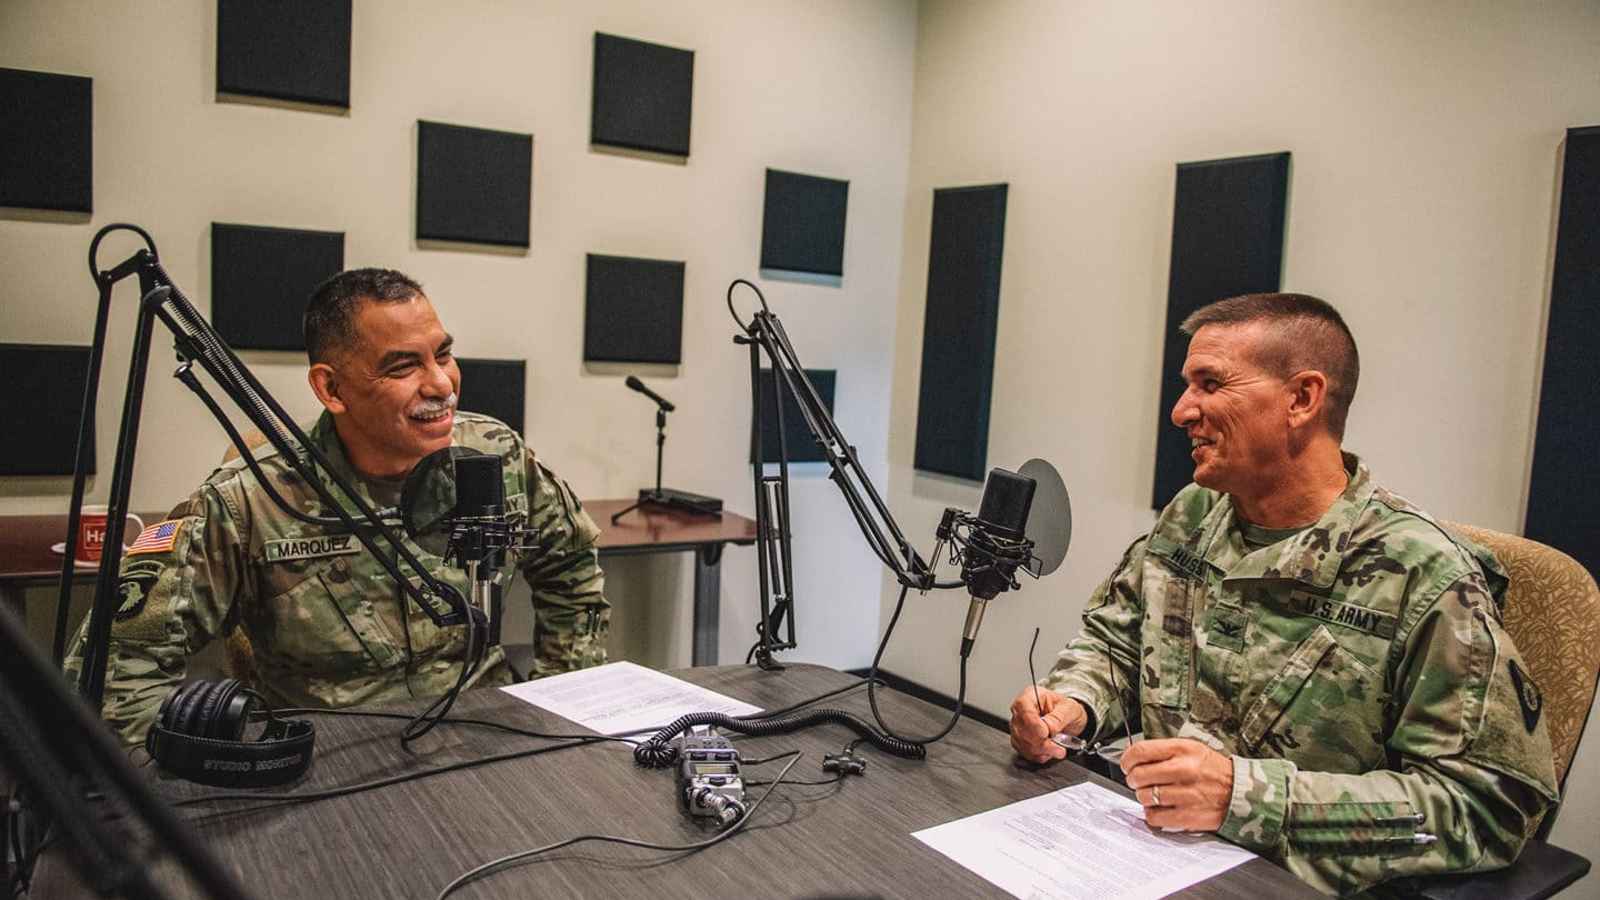 National Military Podcast Day 2023: Date, History, Facts, Events